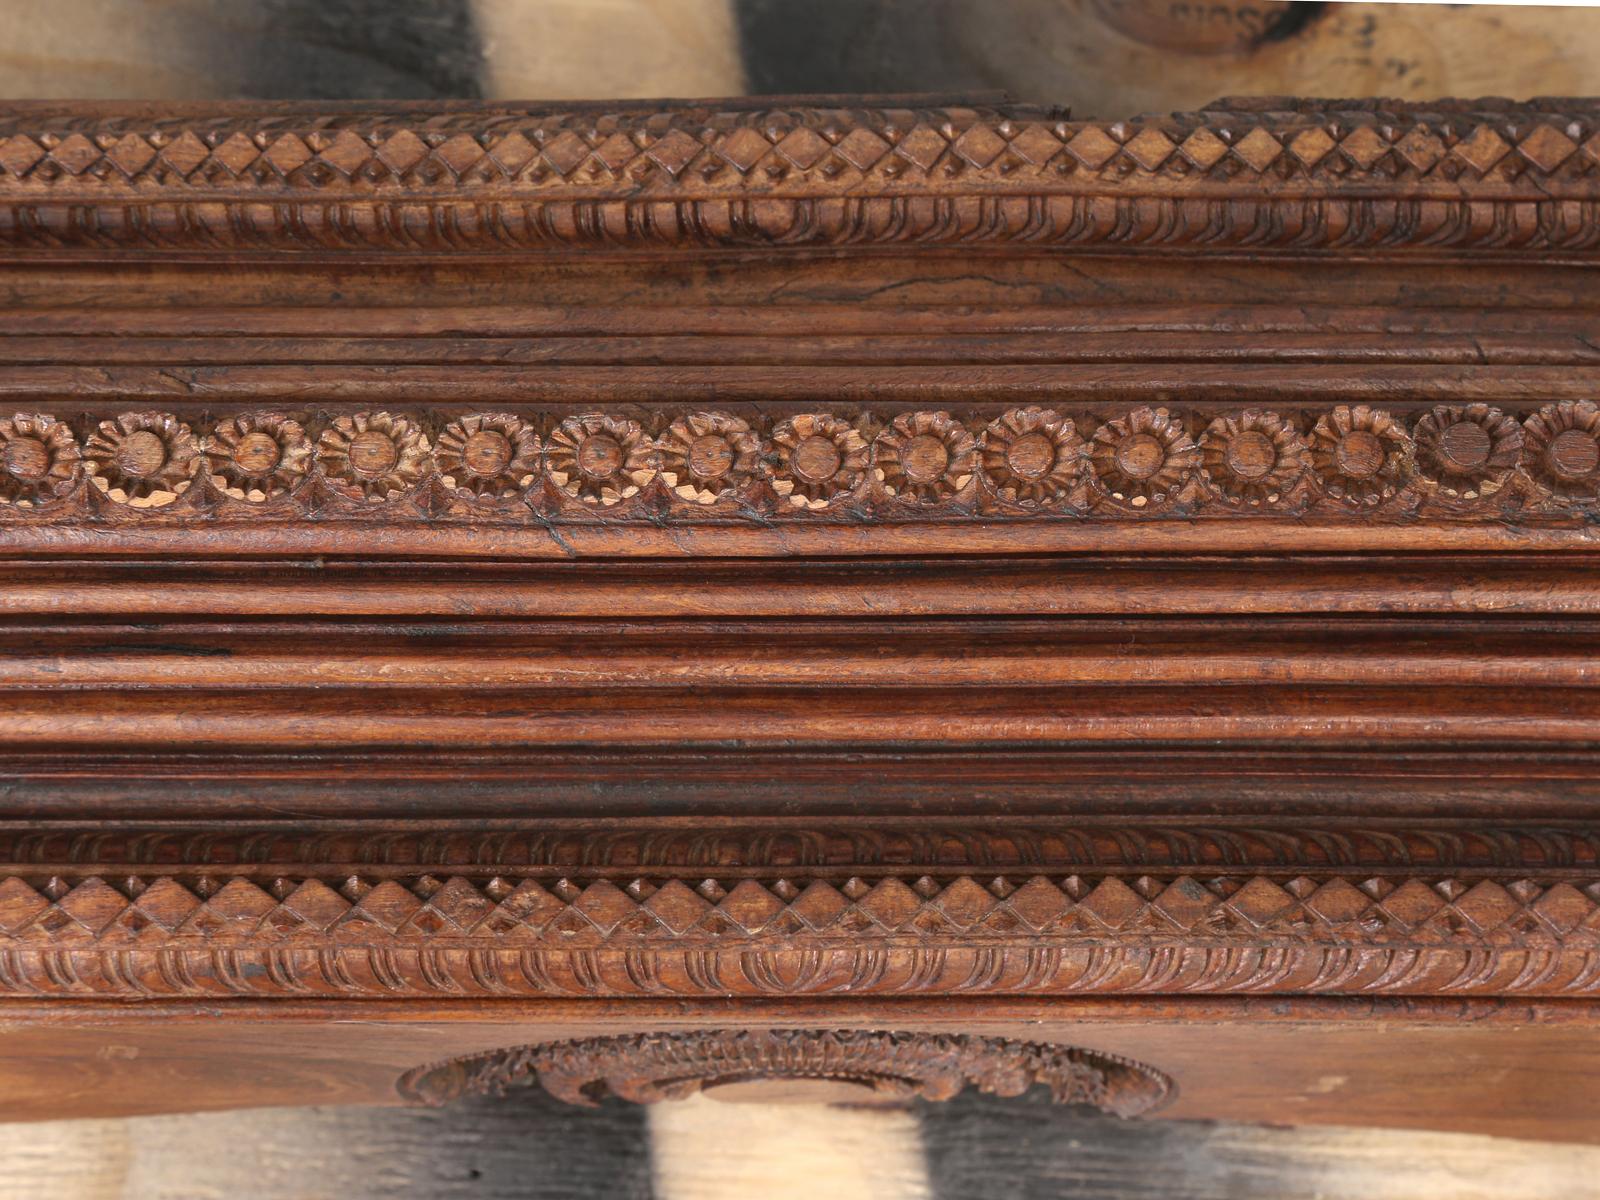 Antique Teak Wood Door Frame India Exquisite Carving Details (3) Available c1800 For Sale 4